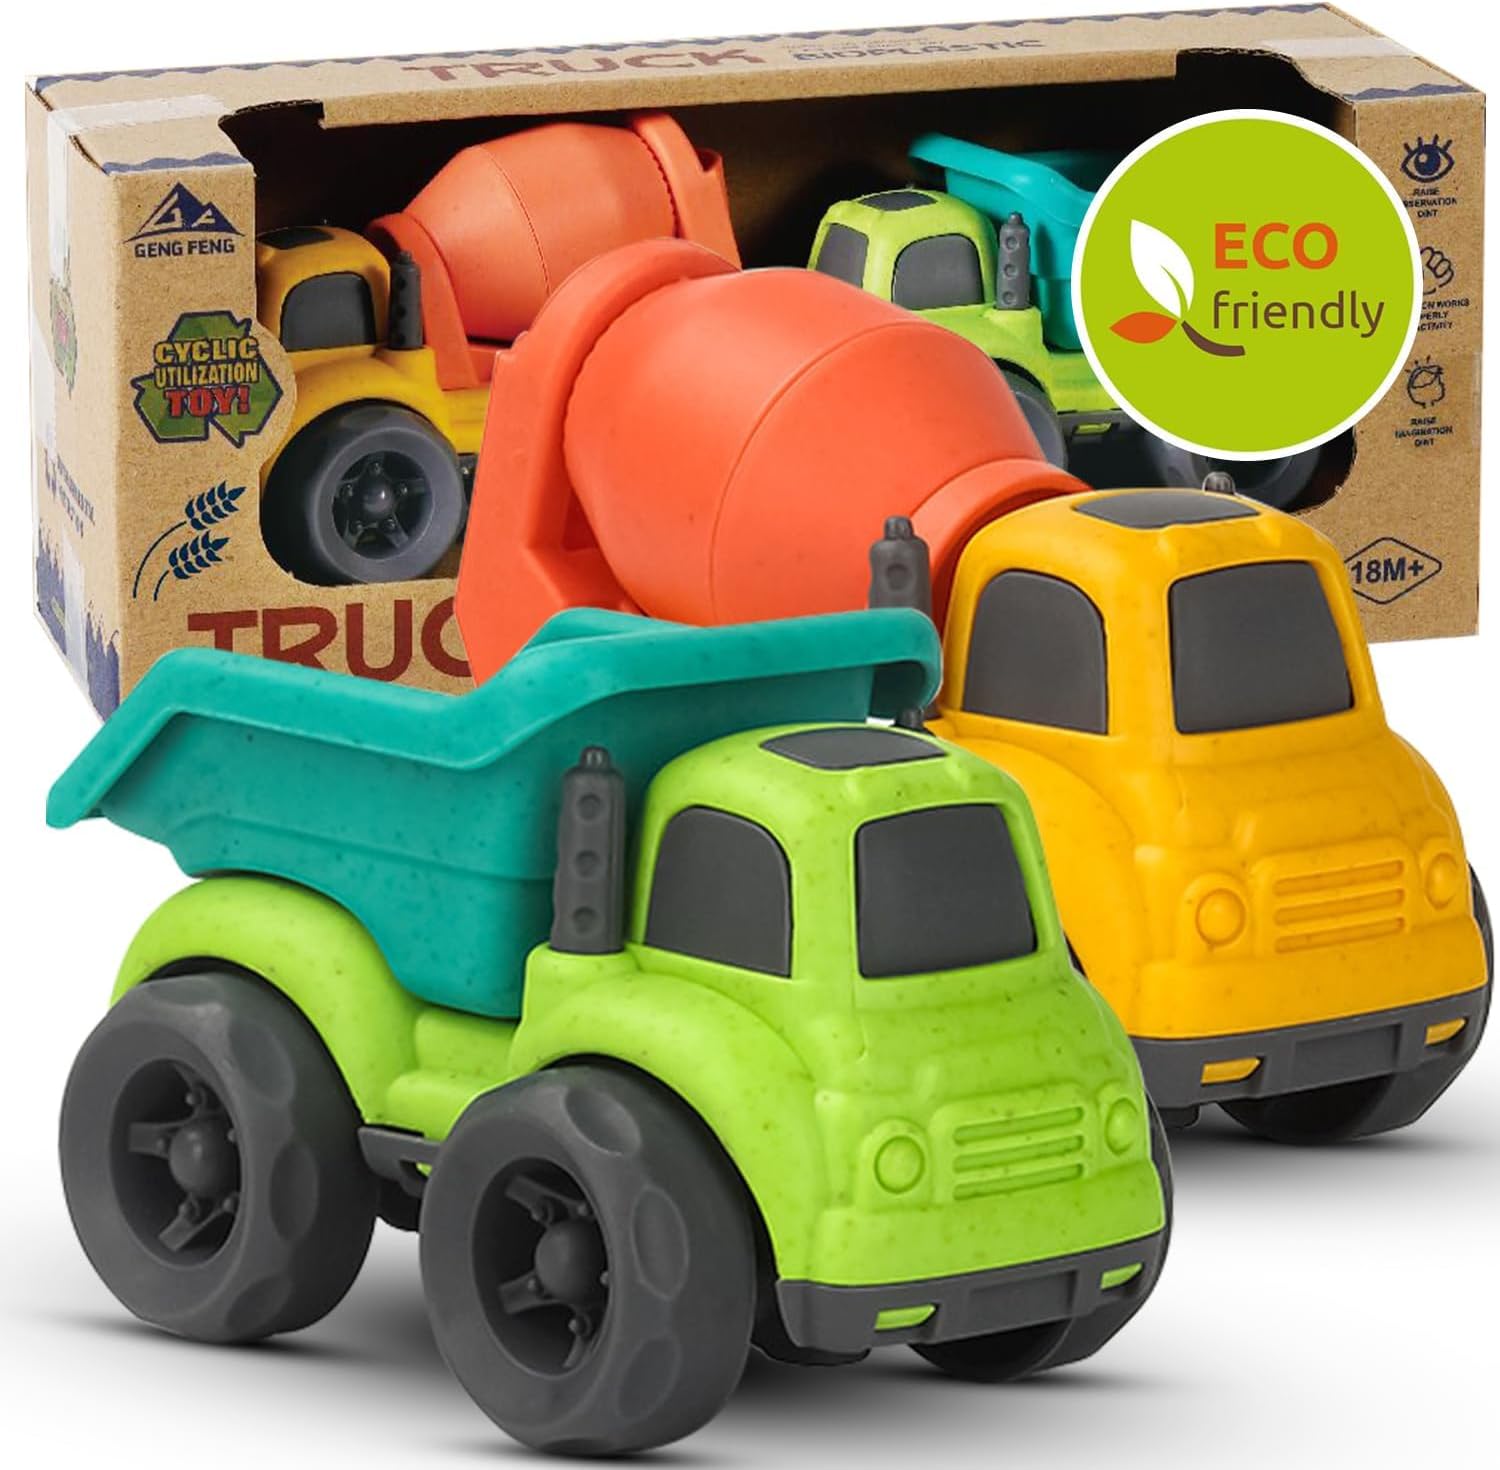 Toy Cars and Trucks for kids